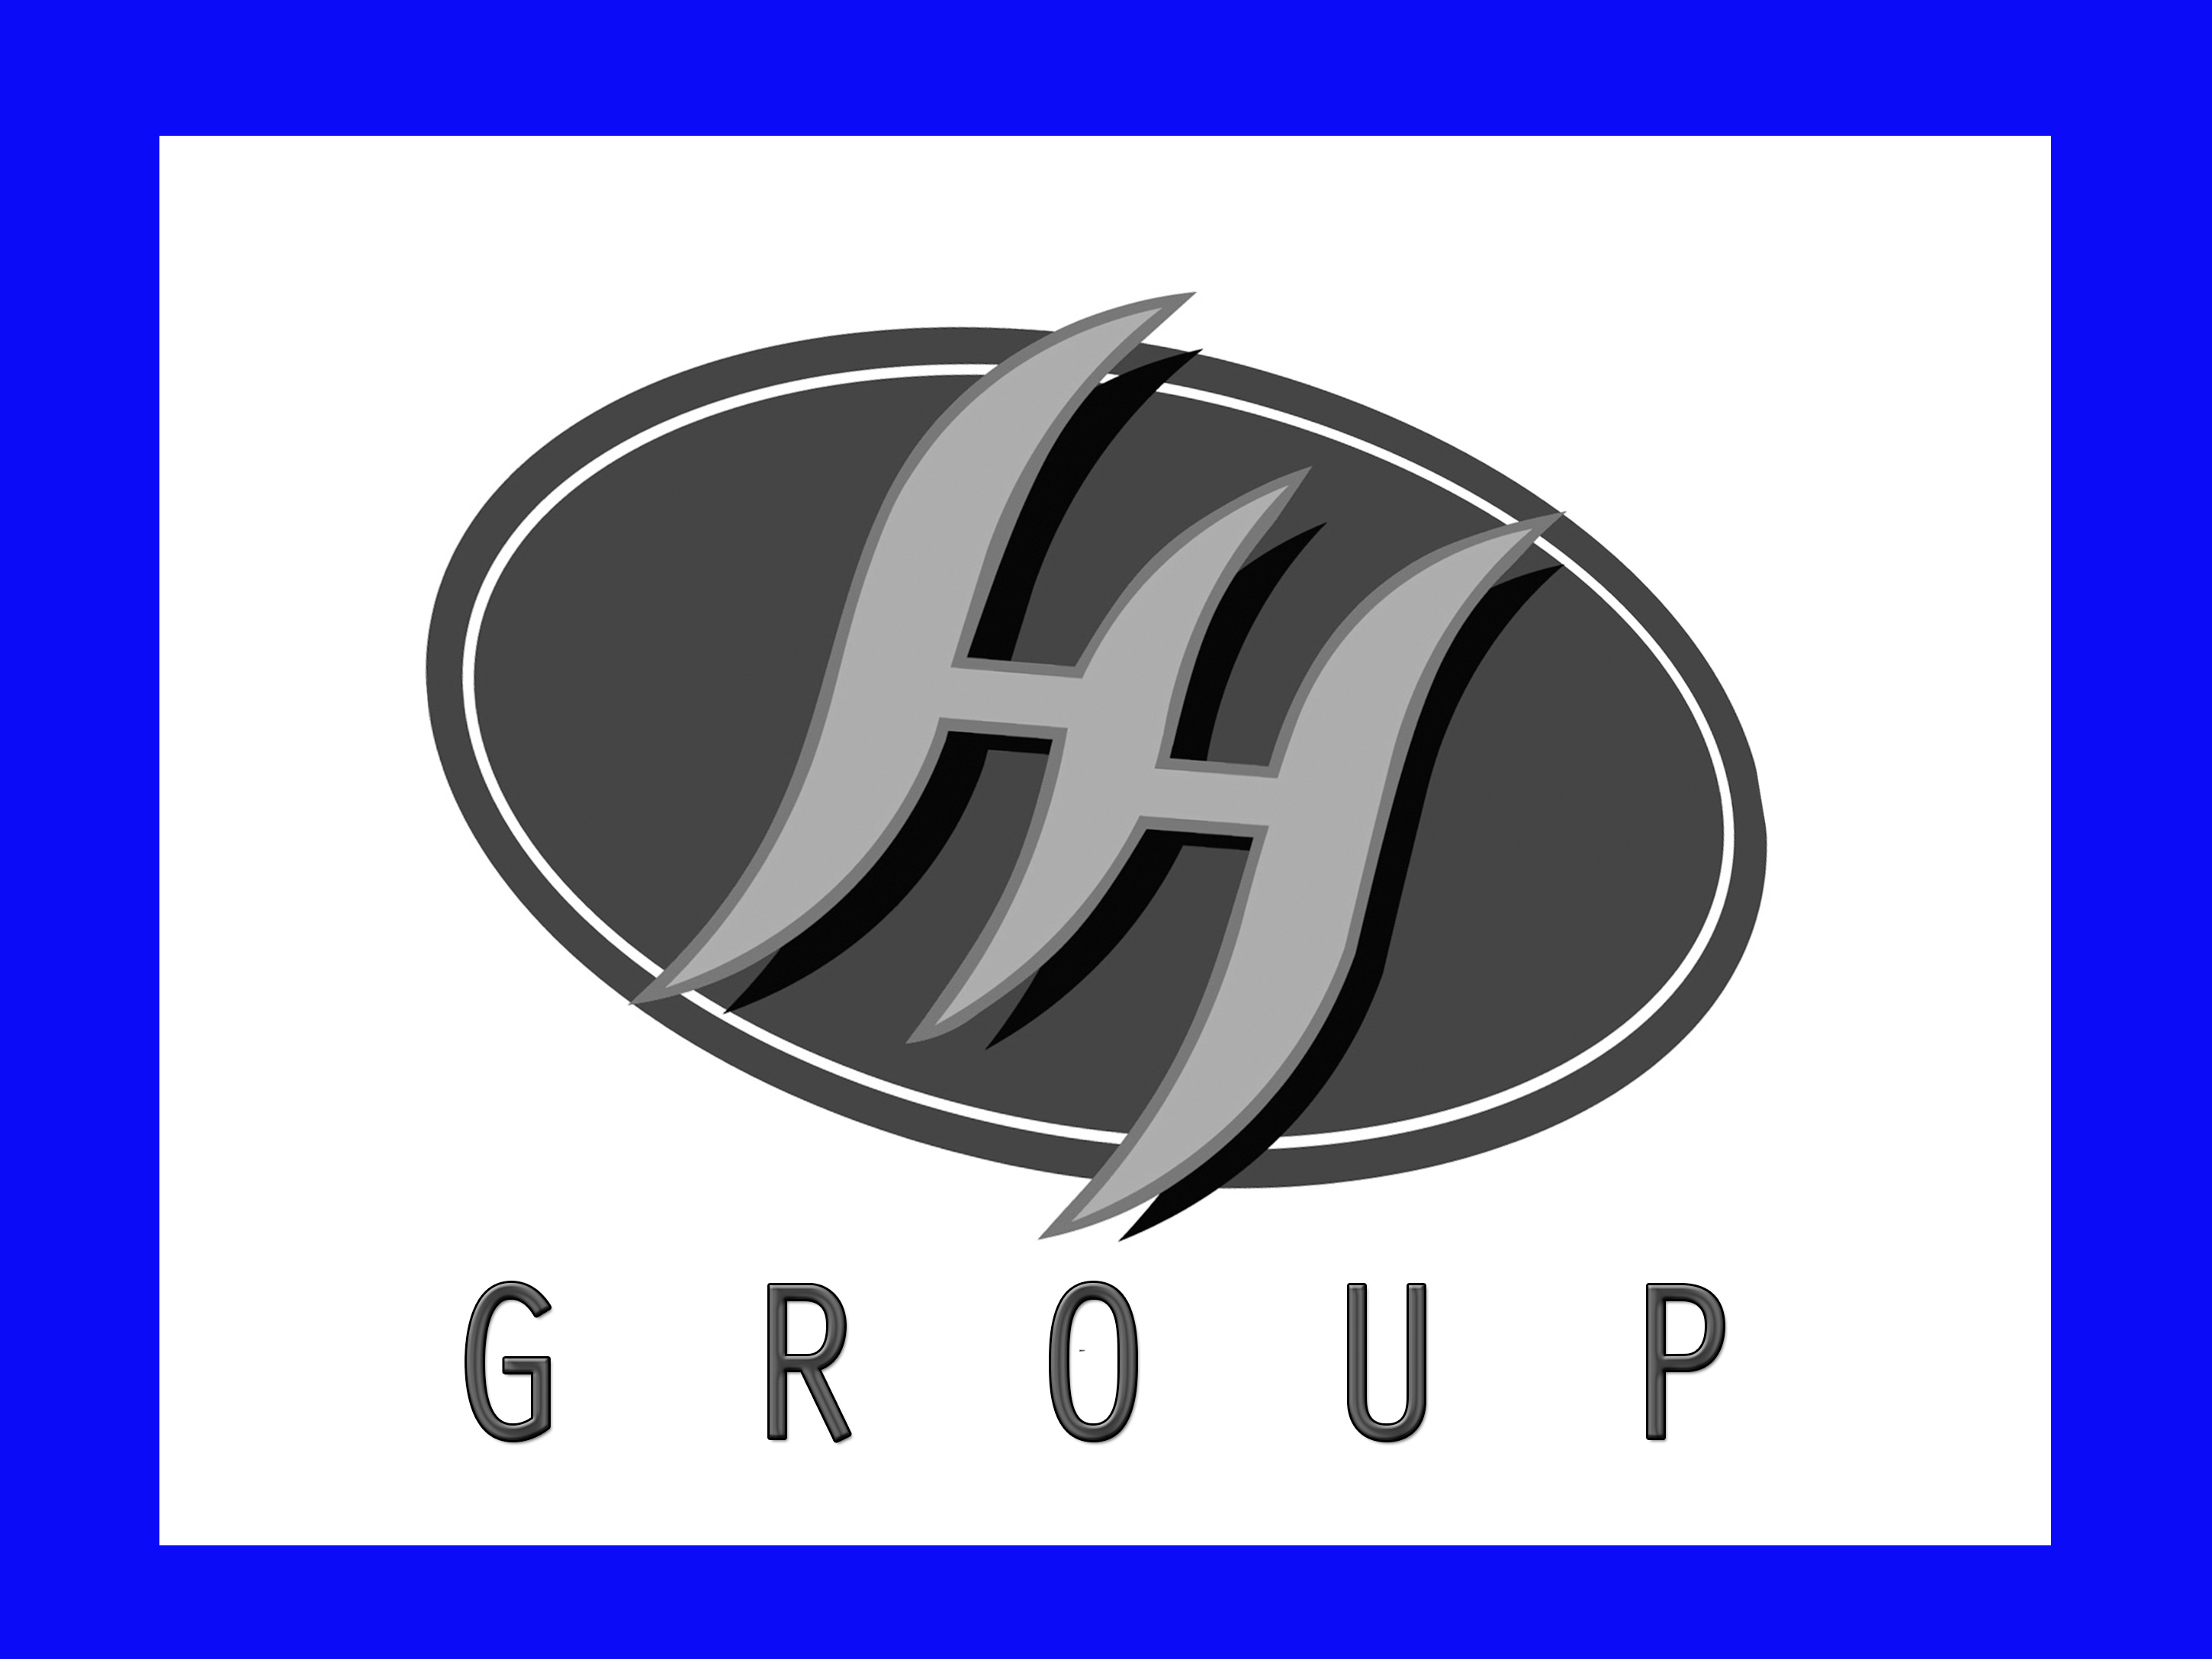 HH GROUP - HH GROUP provides the best and affordable solution to all your business marketing needs. We can create and manage all your marketing requirements by optimizing your online media exposure.